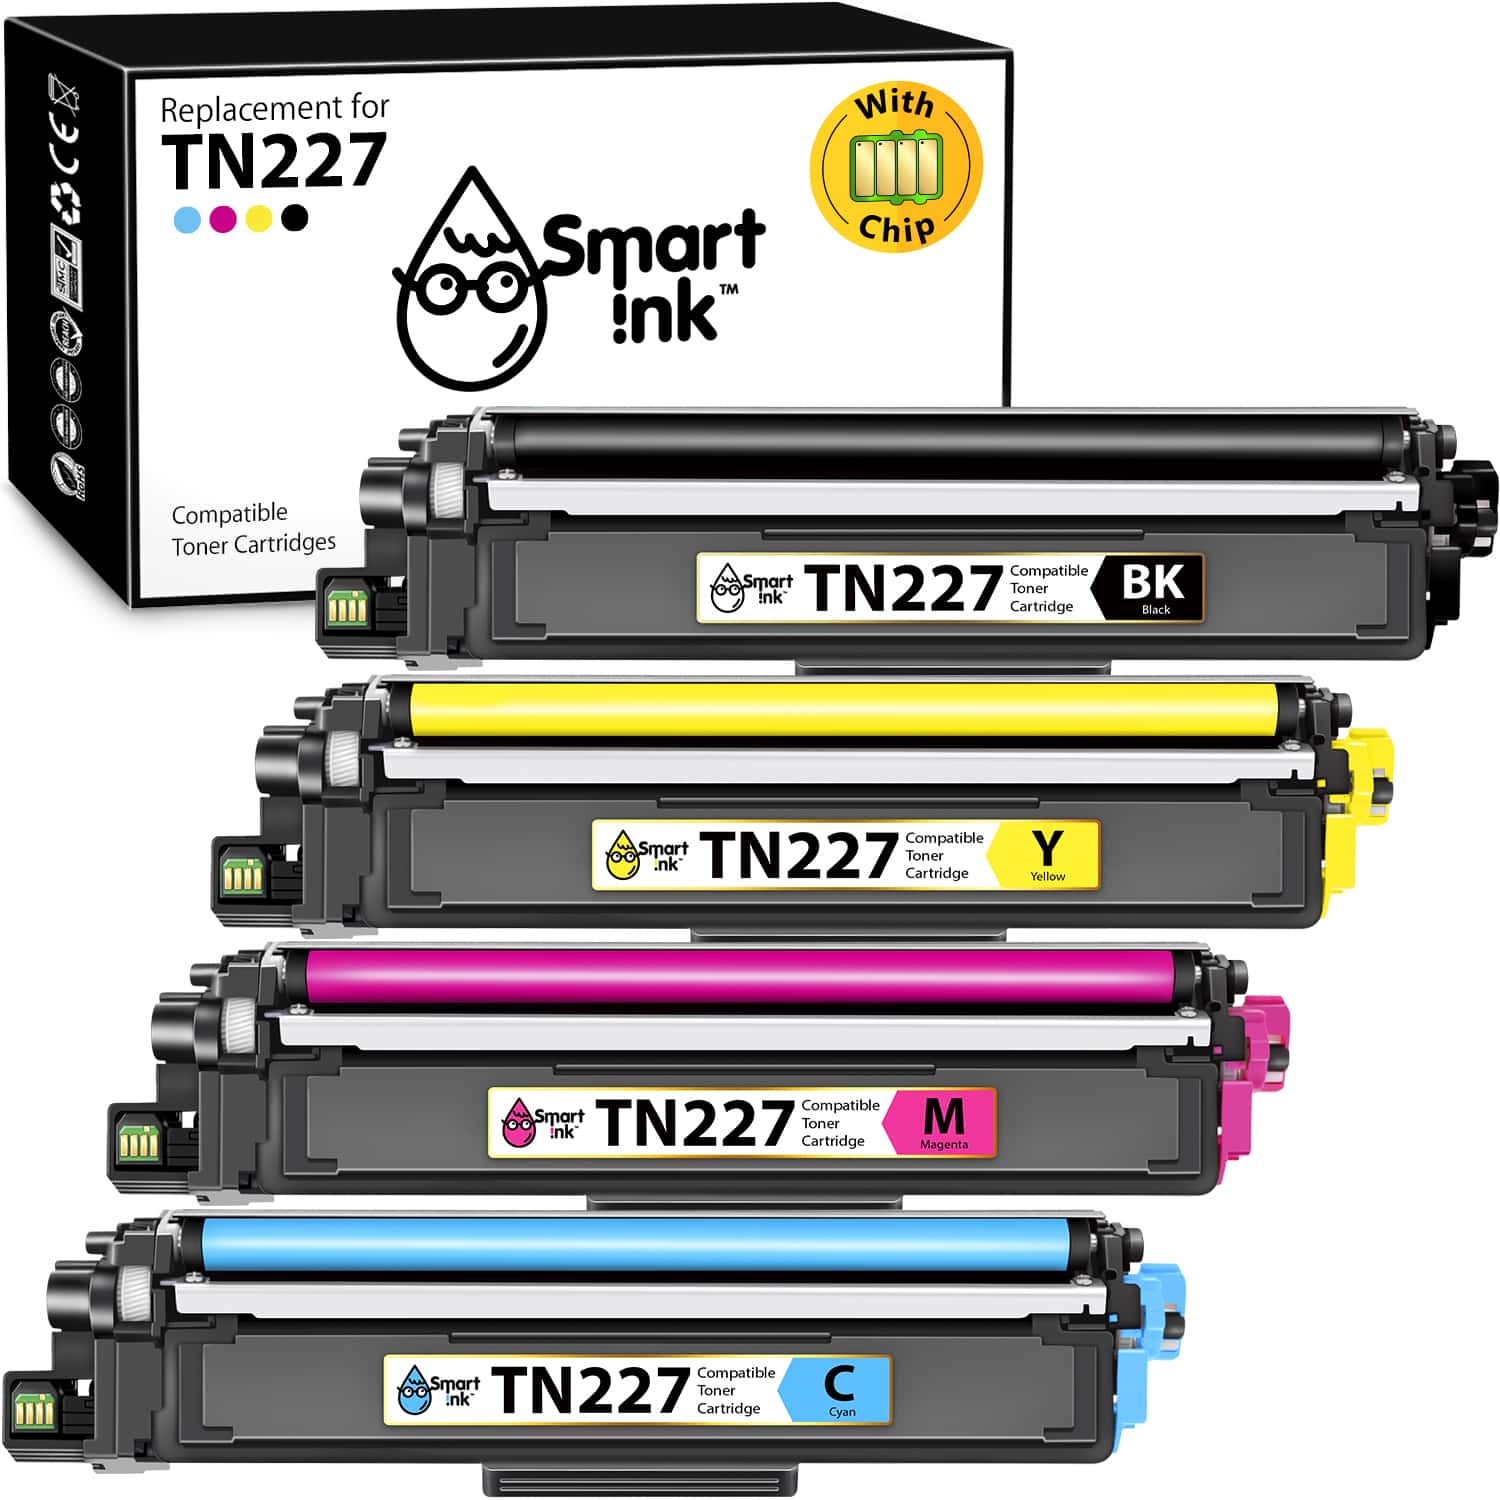 Brother TN 223, TN 227 Replacement Ink Cartridges - Buy Brother TN 223, TN  227 Ink Cartridge in Canada